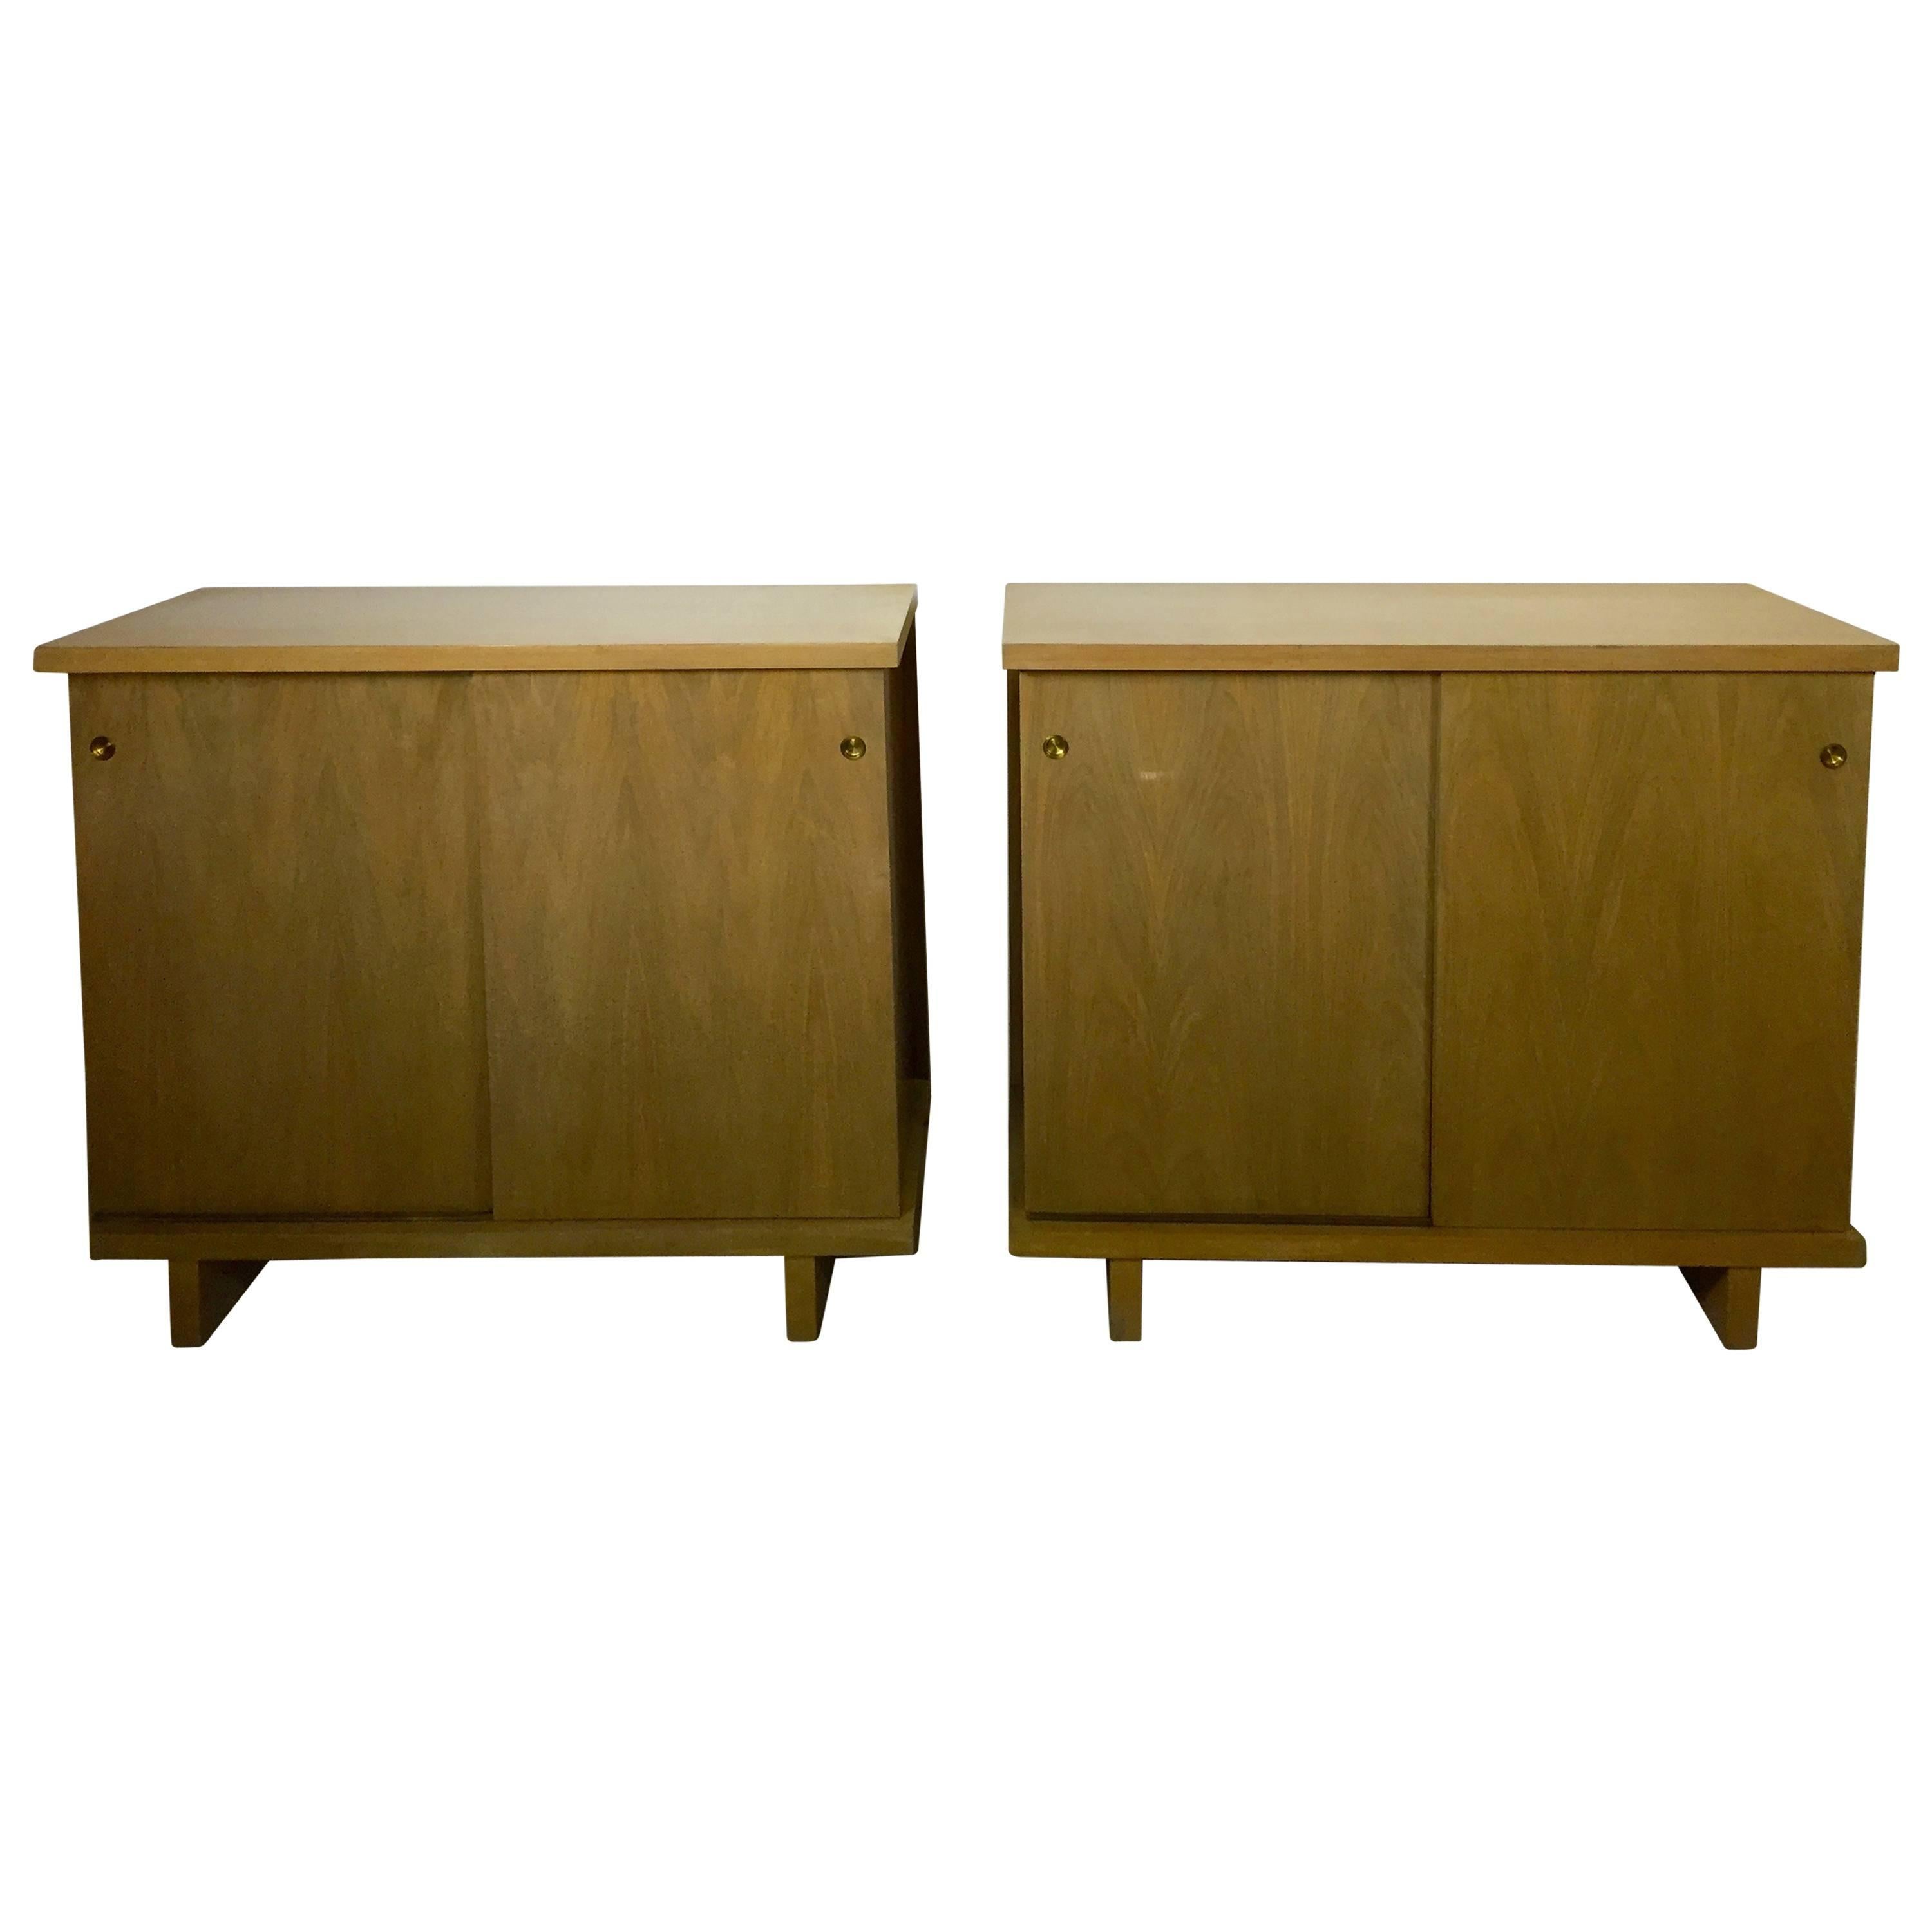 Large Pair of Matching Chests in Bleached Walnut